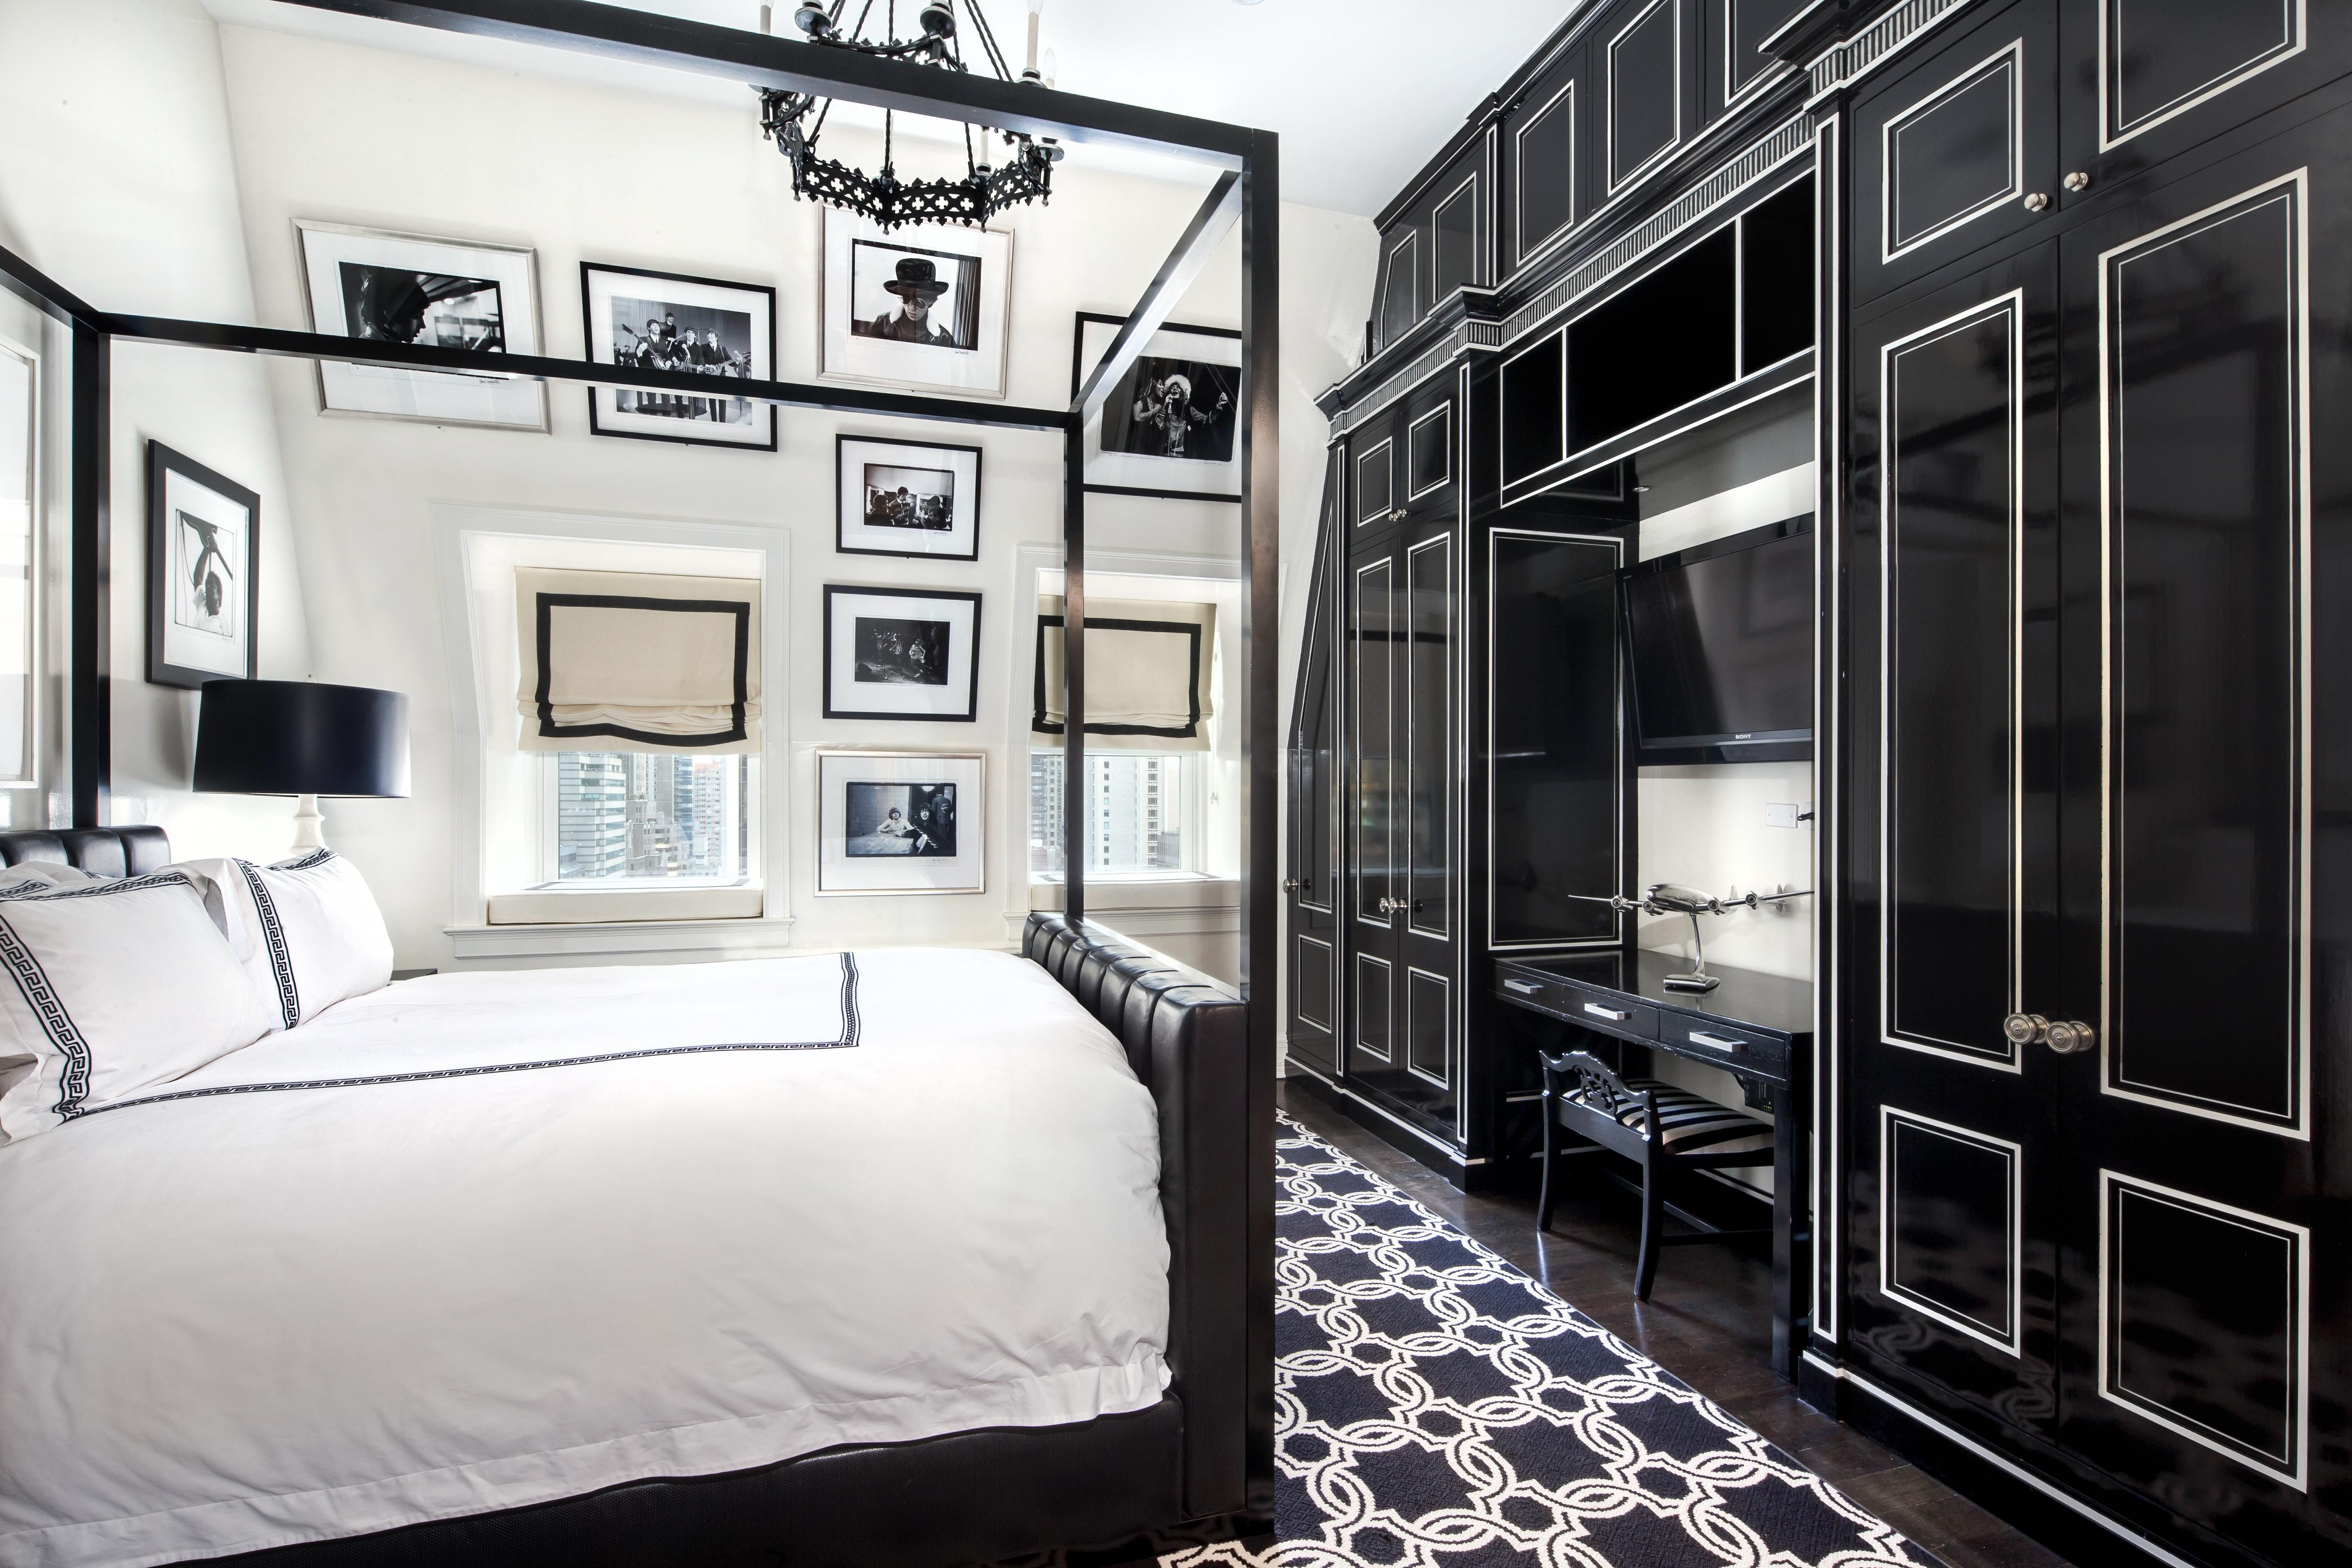 Black and White Bedroom Decor with timeless glamour